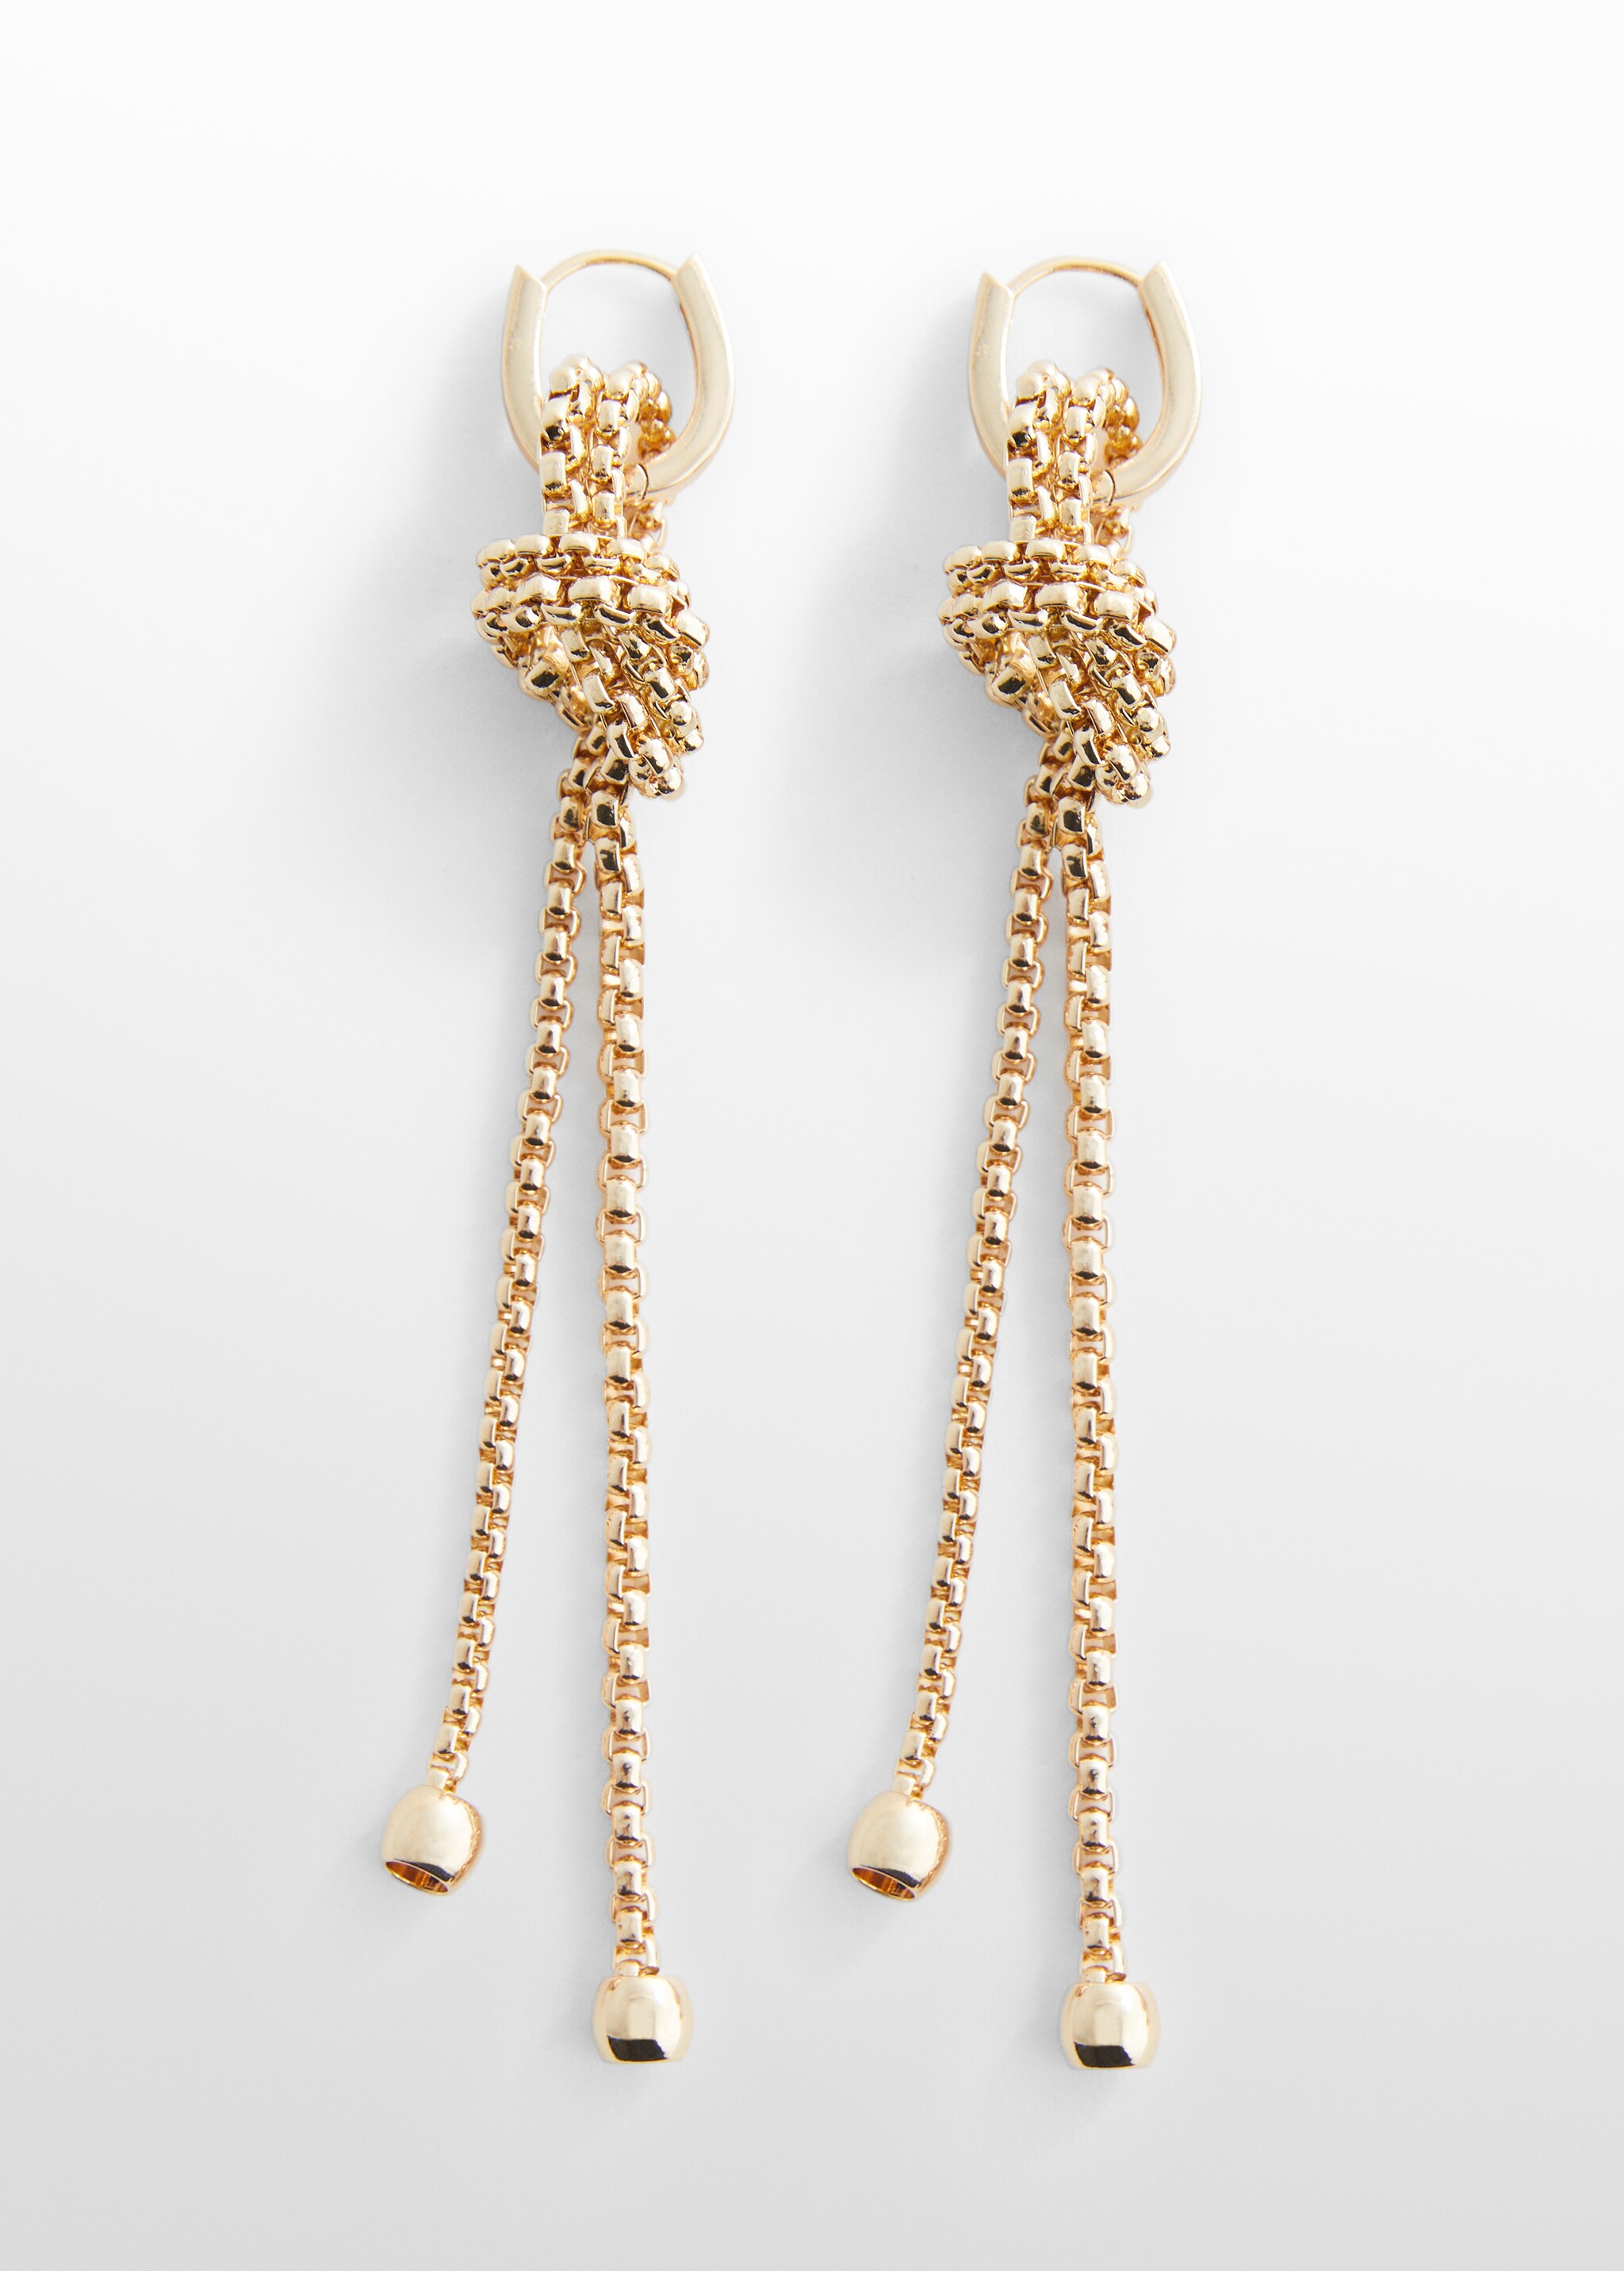 Combined-knot earrings - Article without model